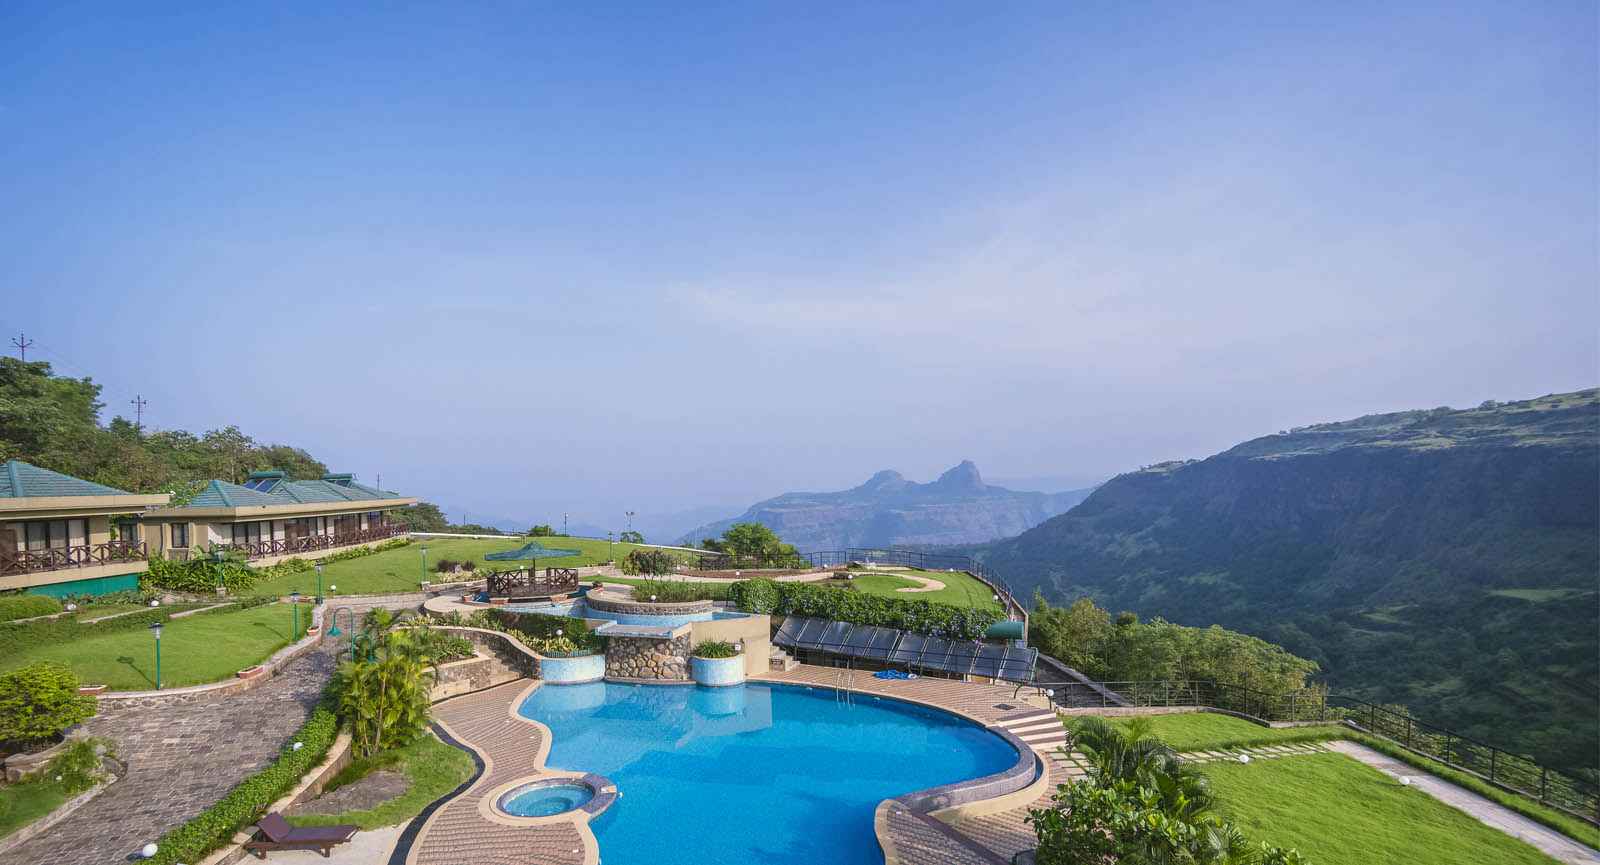 11 Amazing Hotels and Resorts To Stay In Khandala